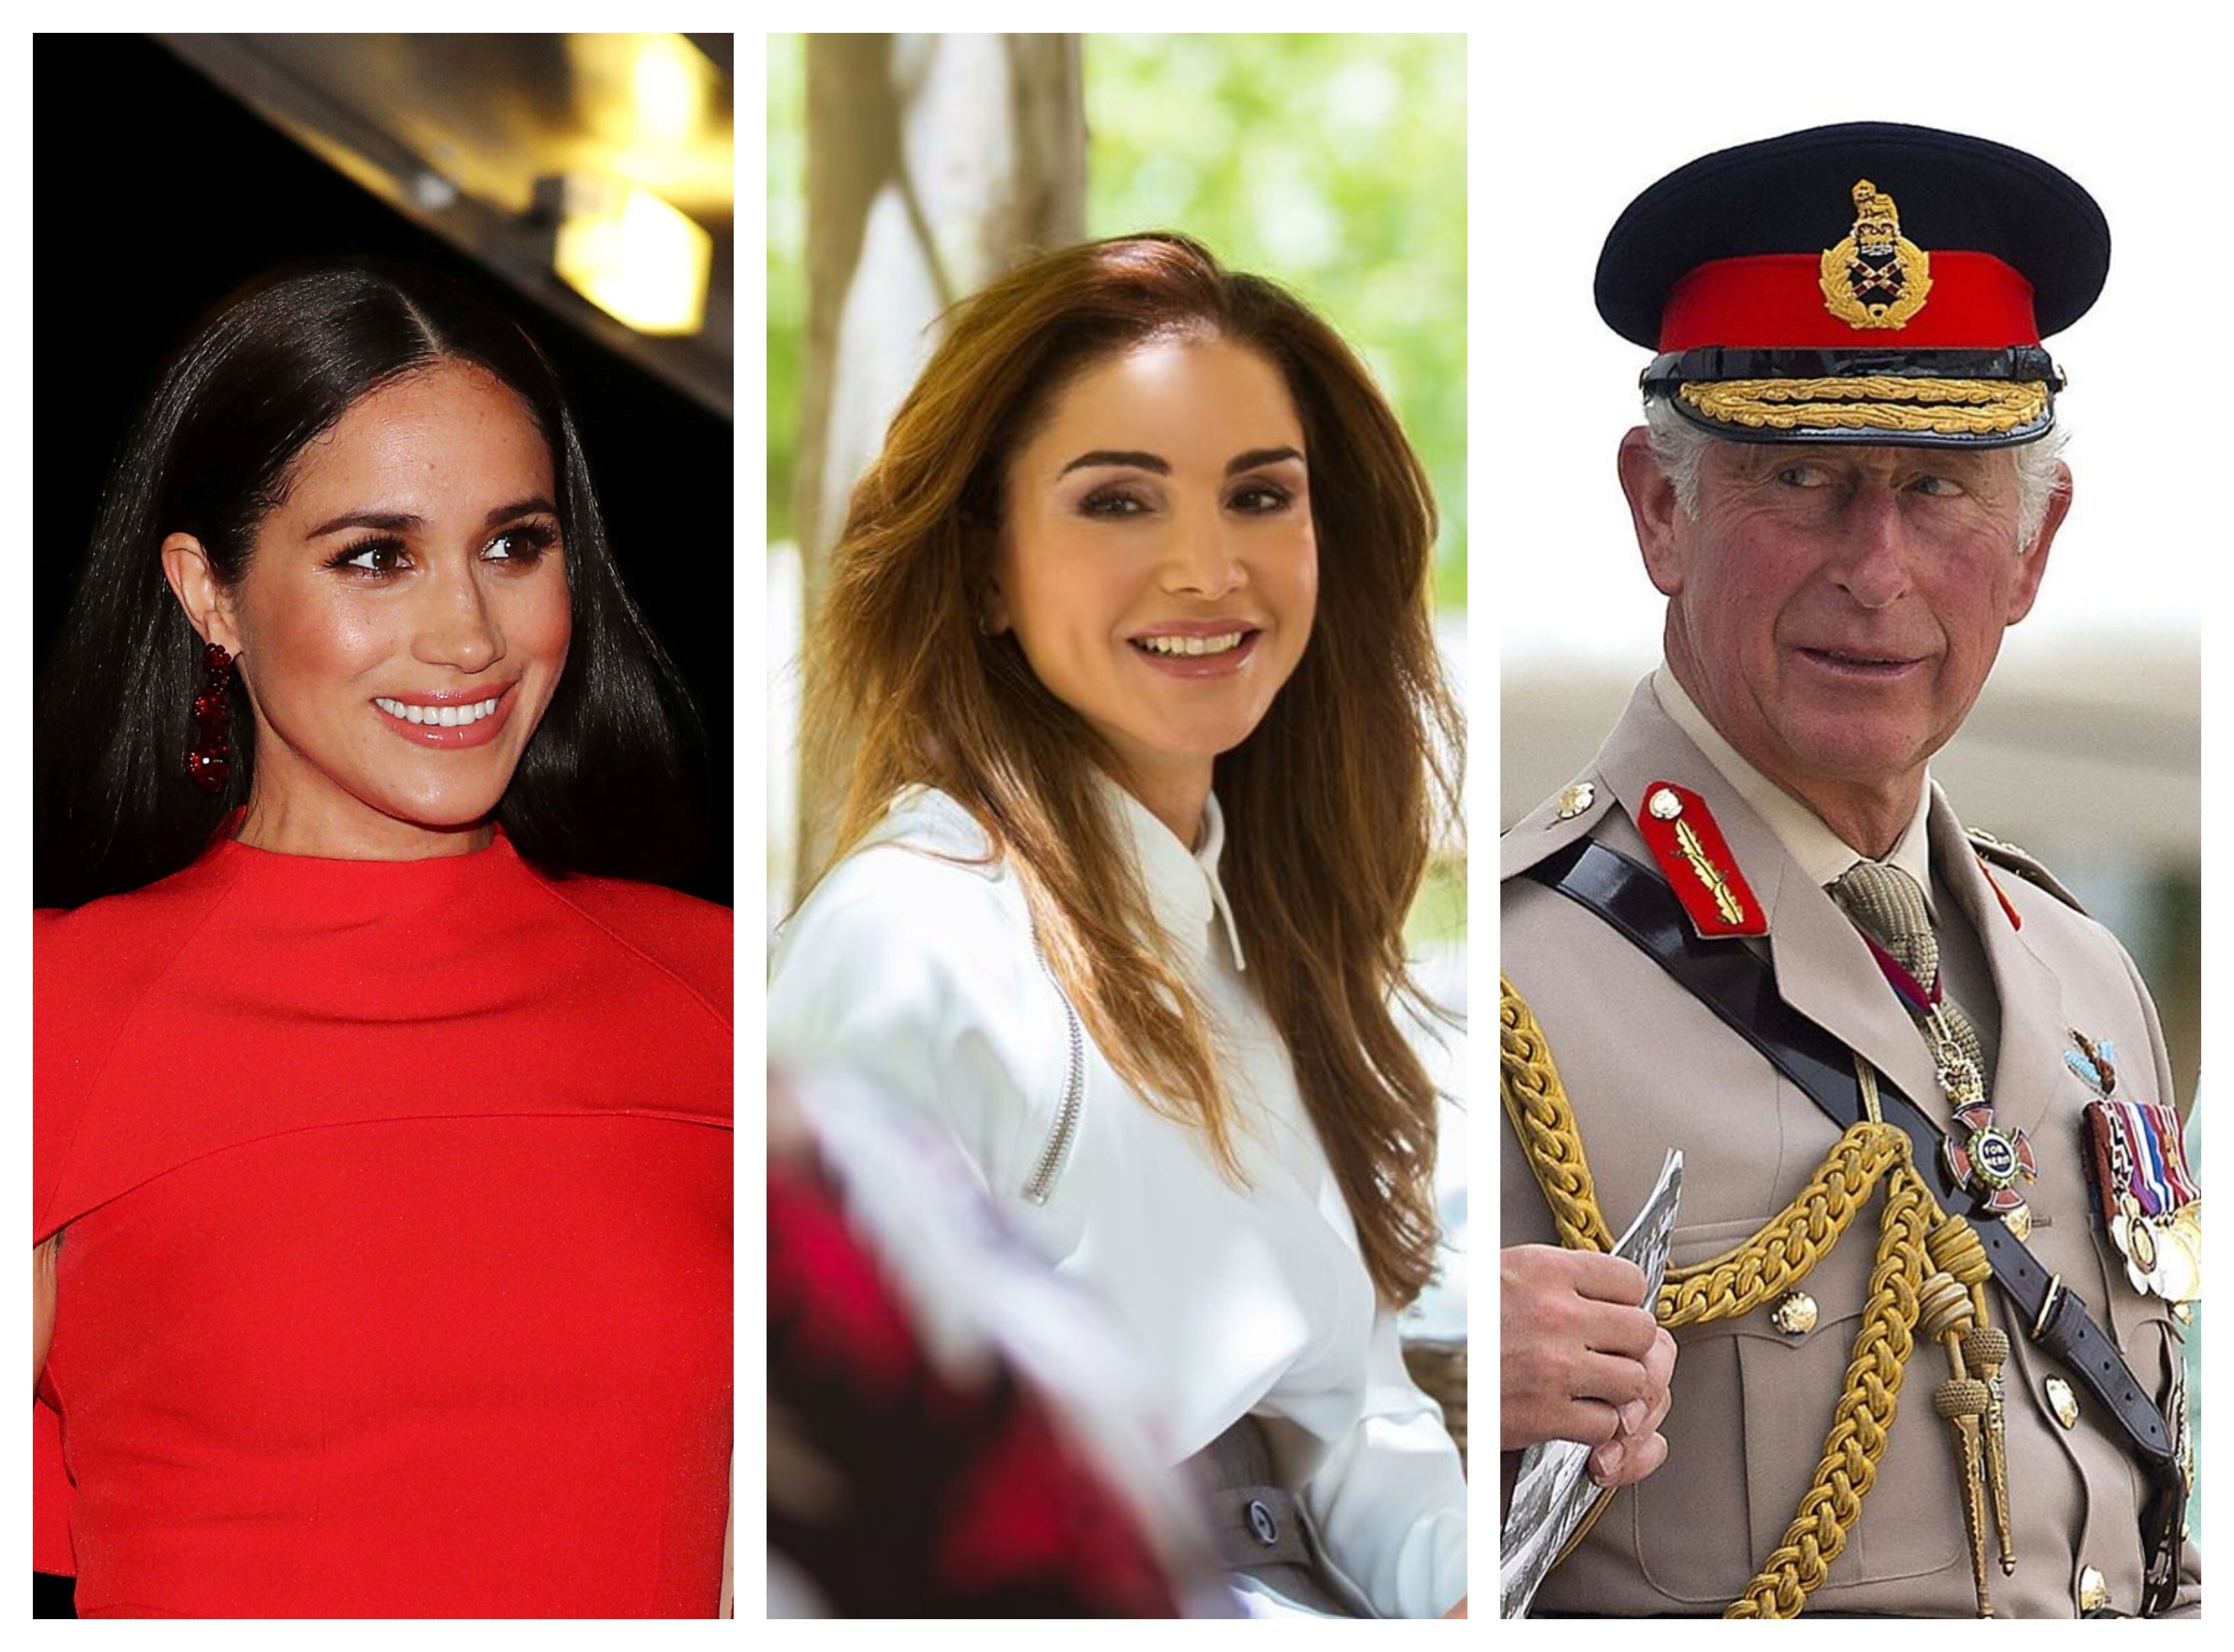 Royals who have written books: Meghan Markle, Queen Rania of Jordan, Prince Charles. Photos: Reuters, @queenrania/Instagram, @charlesprinceofwales/Instagram